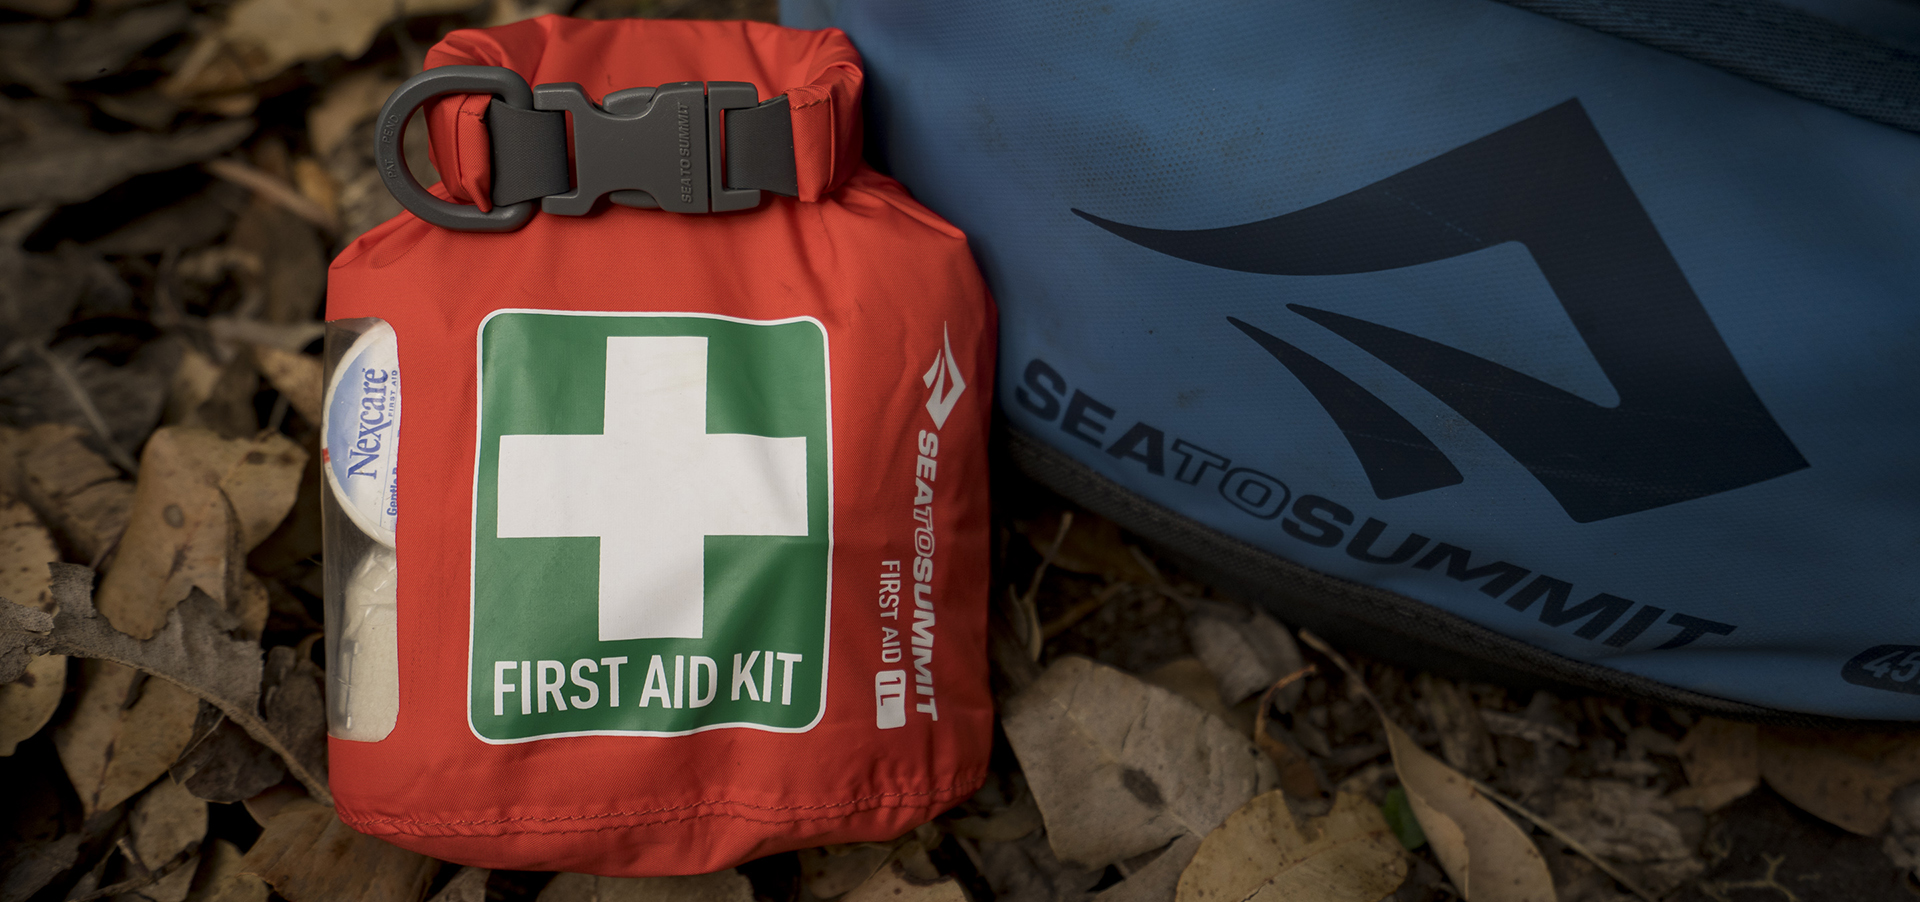 Bags, Boxes, Cases & Packs: First Aid Dry Sack by Sea to Summit - Image 4585